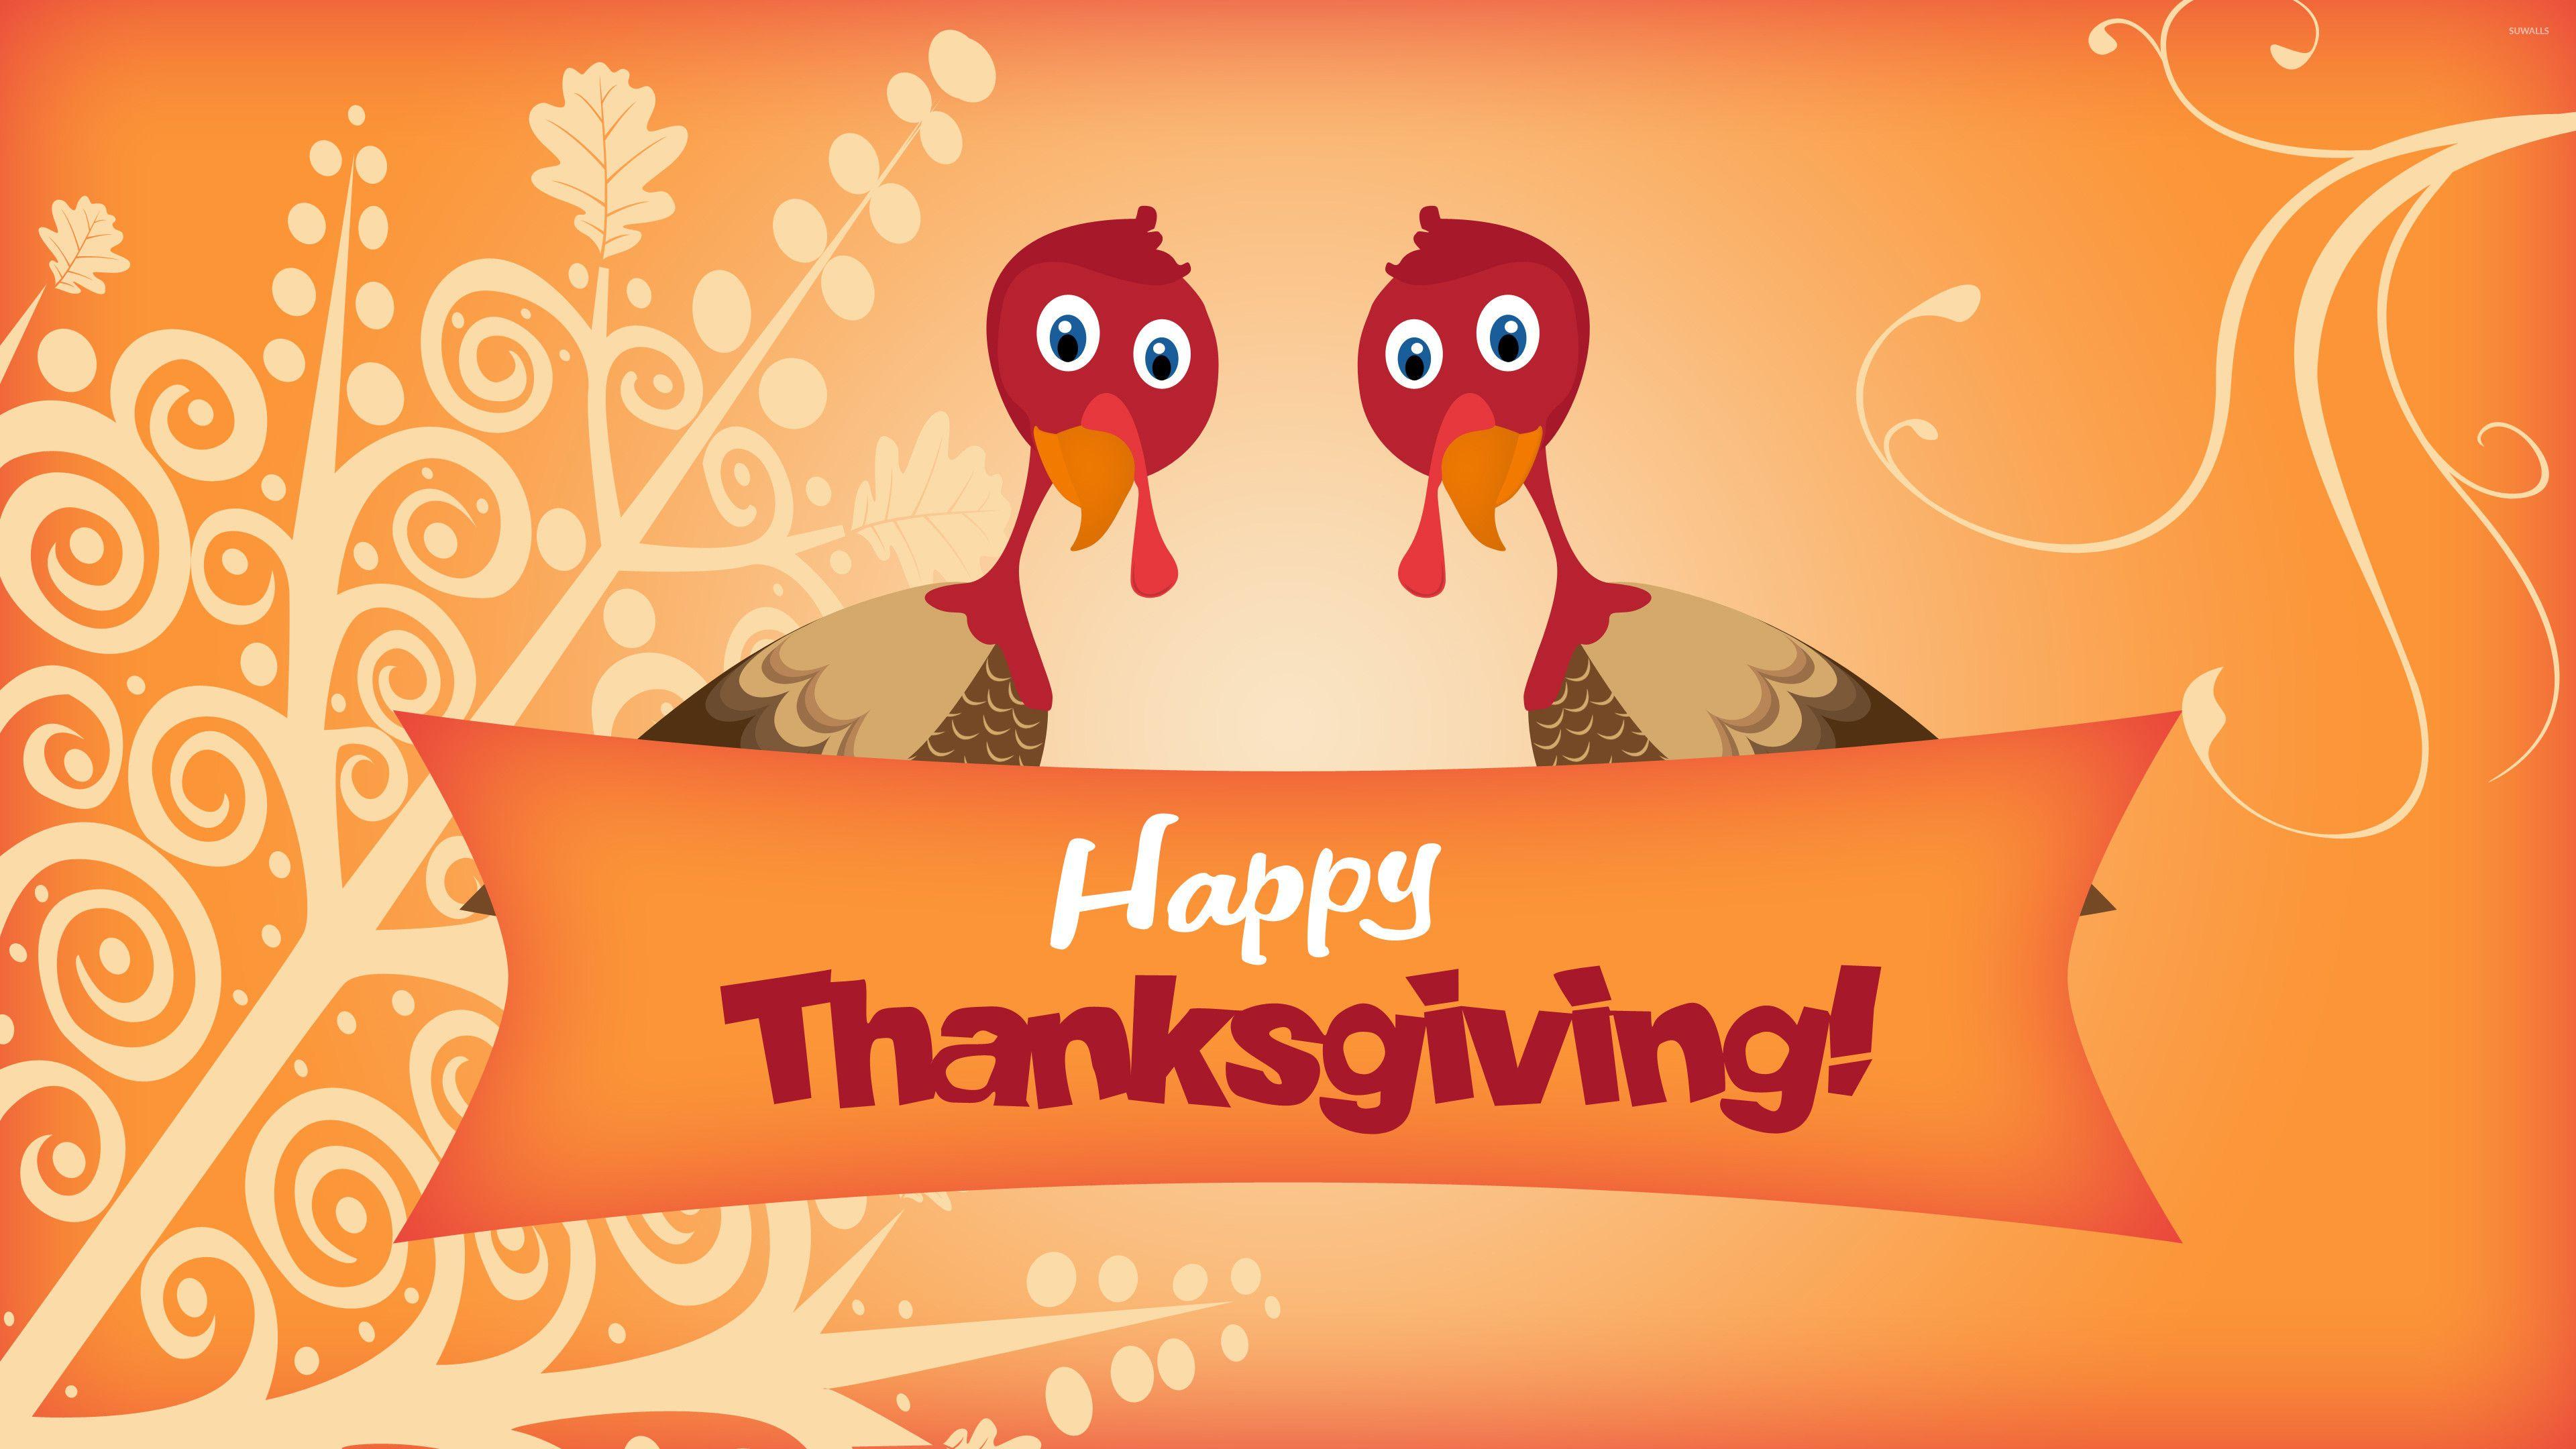 Happy Thanksgiving Day 2019: Turkey Image, Picture, Quotes